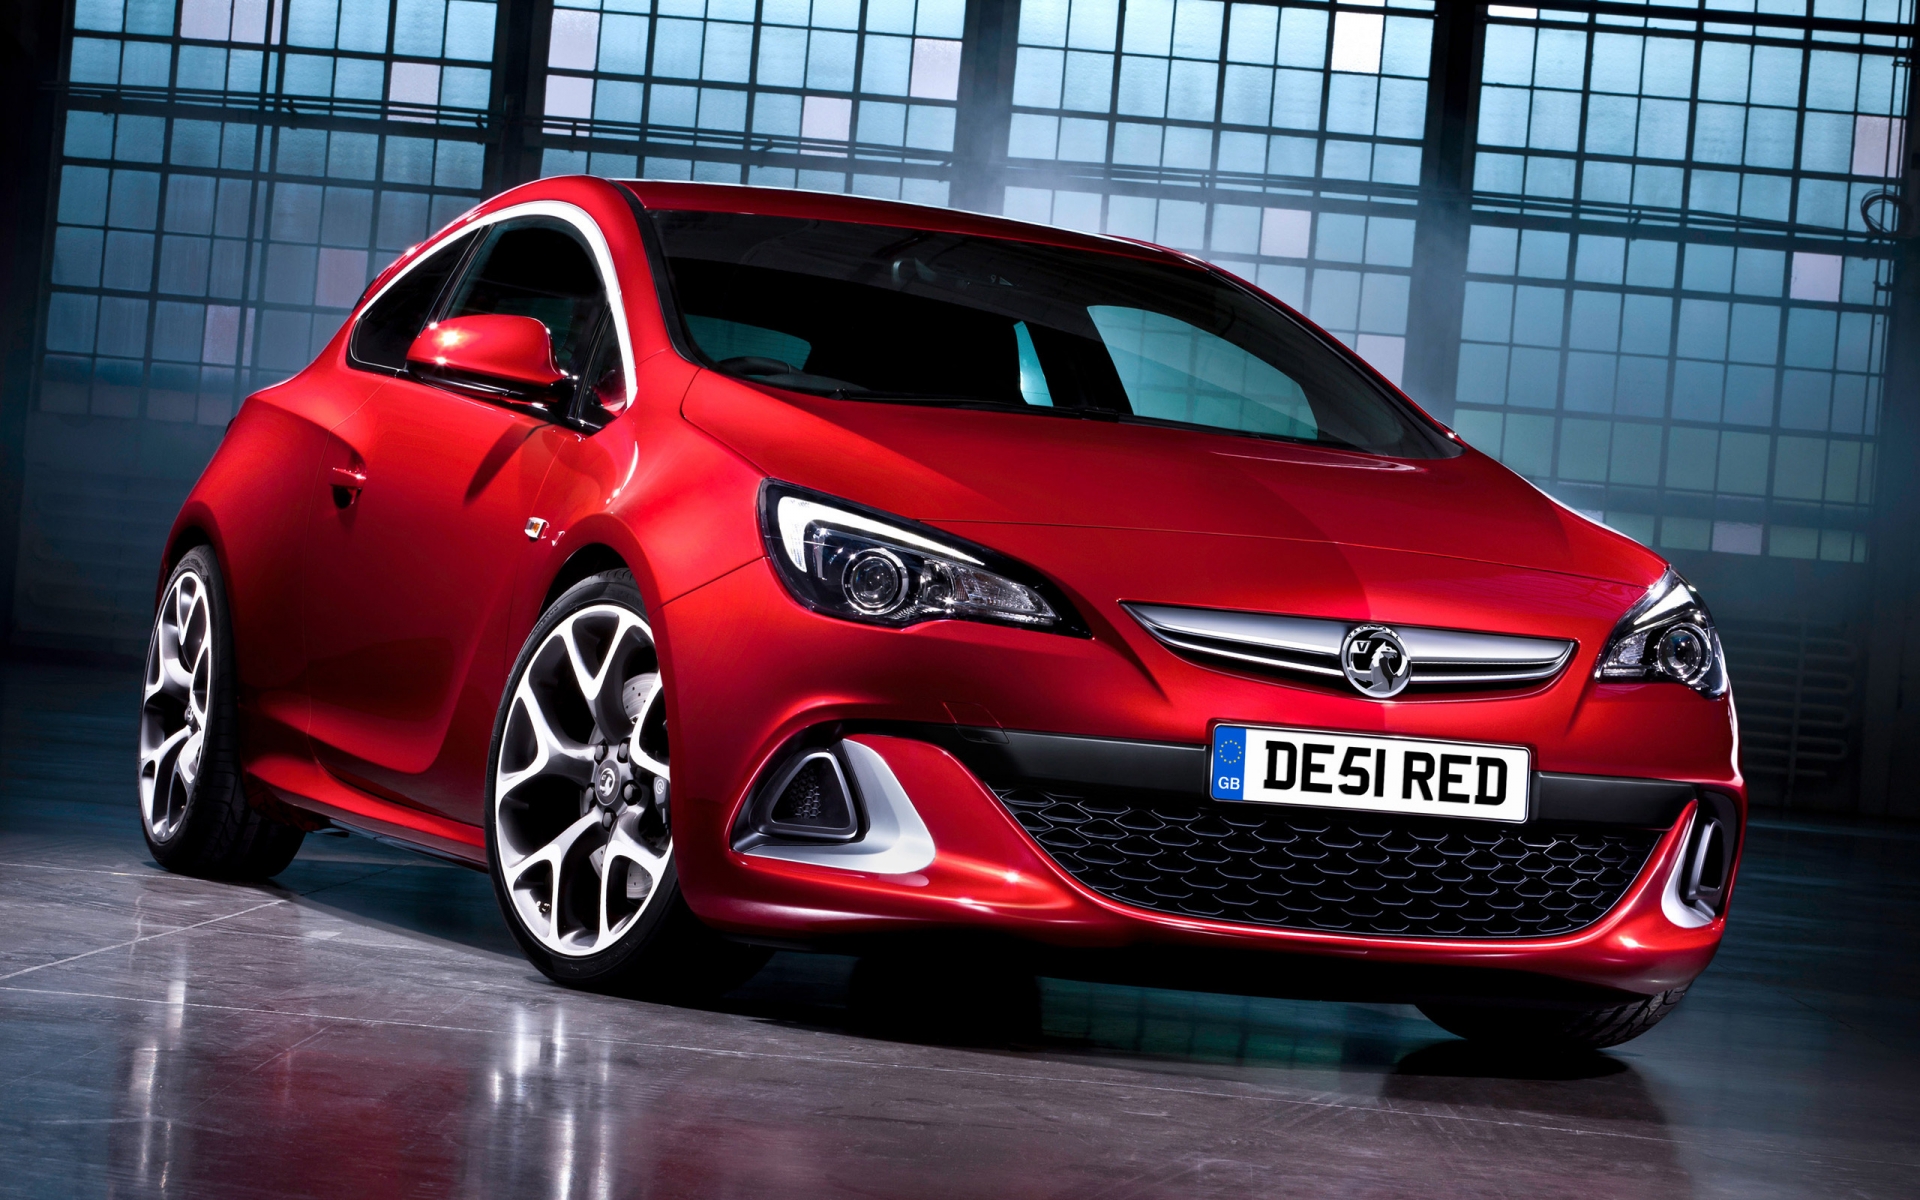 2012 Vauxhall Astra GTC for 1920 x 1200 widescreen resolution